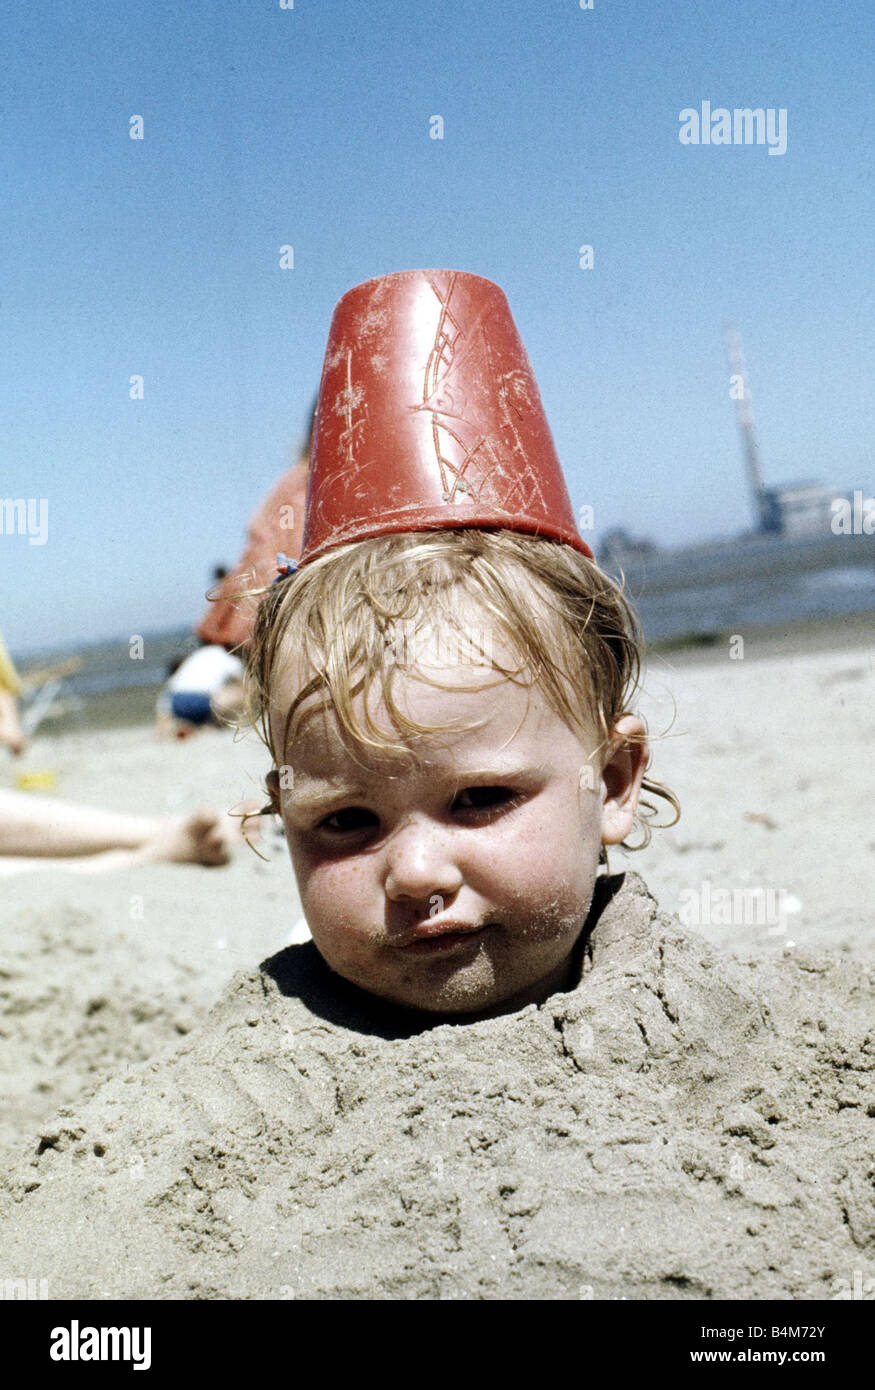 Summer holidays July 1976 Boy buried in sand with red plastic Bucket on his head Stock Photo